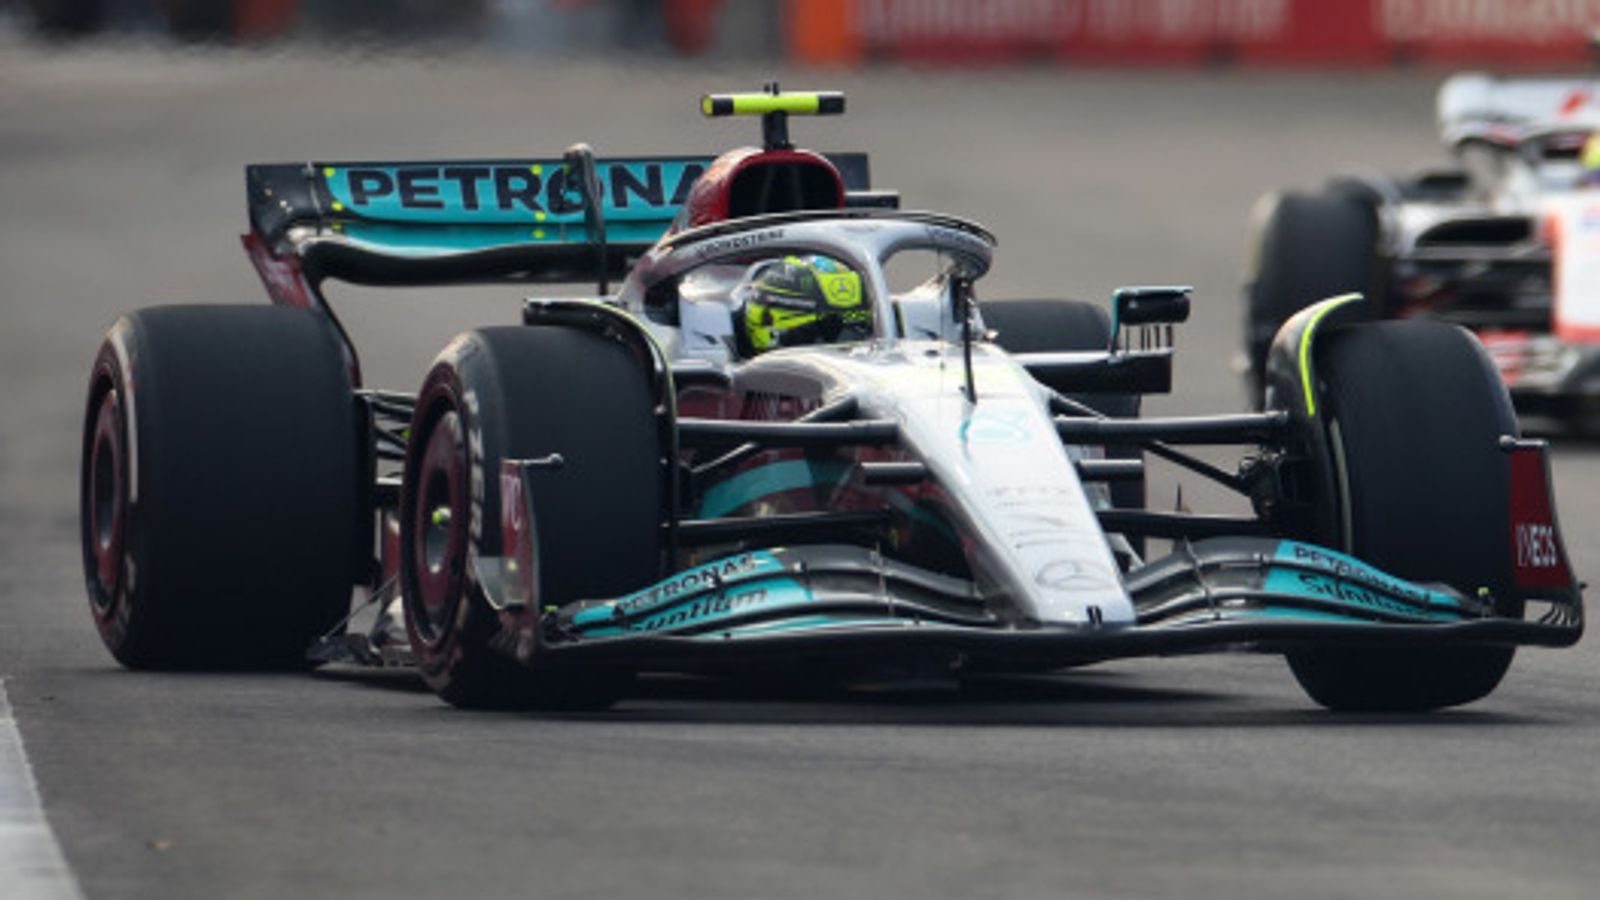 Singapore GP: Lewis Hamilton edges Max Verstappen in Practice One to top a session for first time in 2022